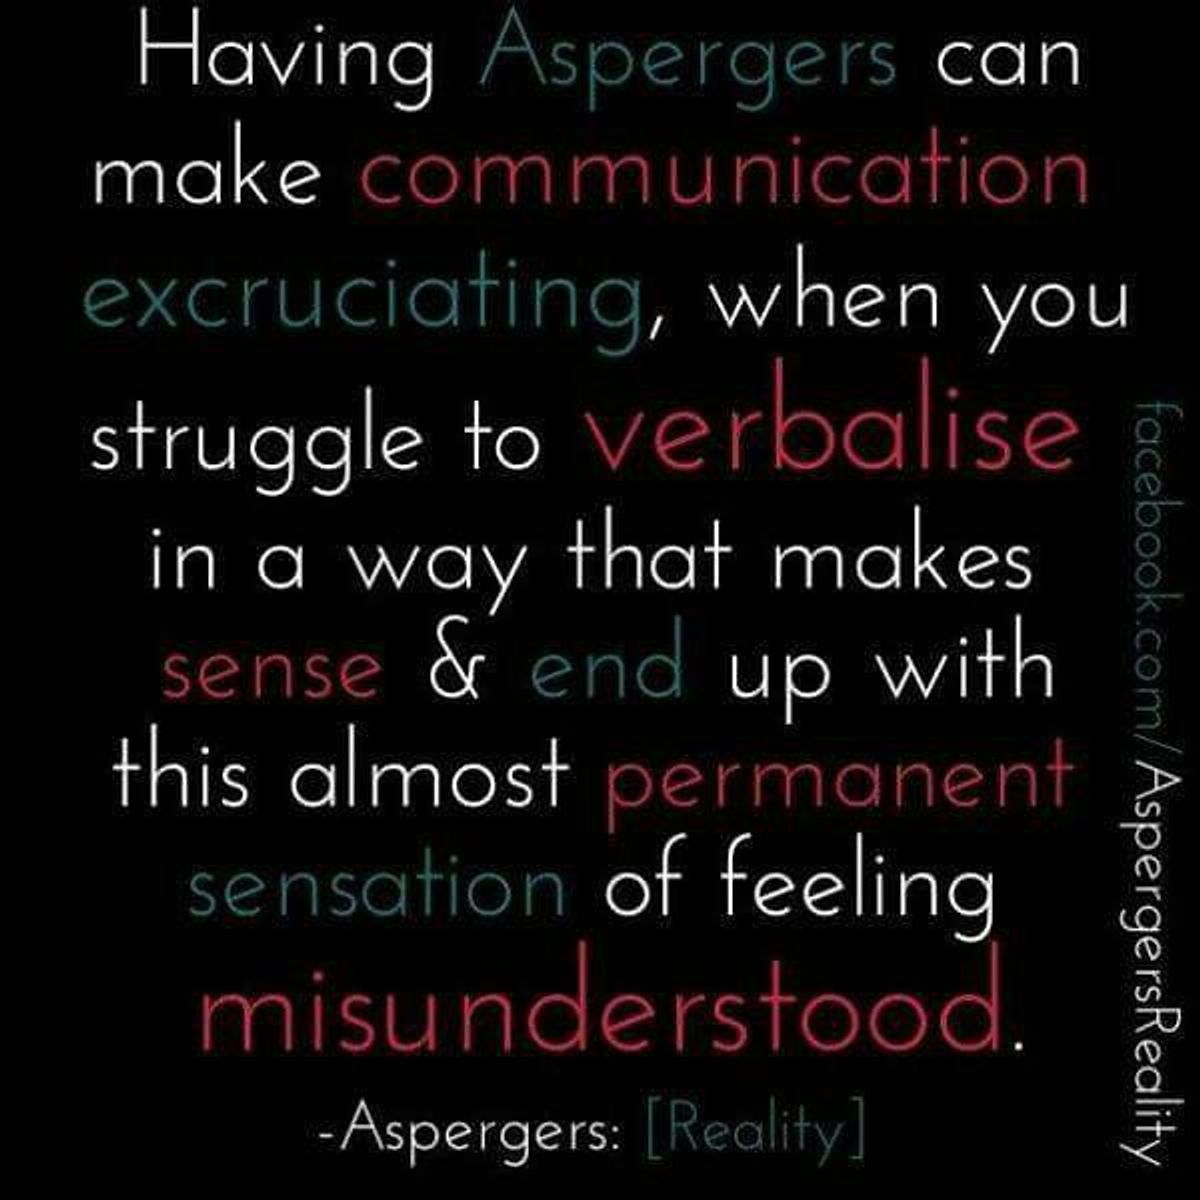 My Struggles And Experiences Of Having Asperger's Syndrome